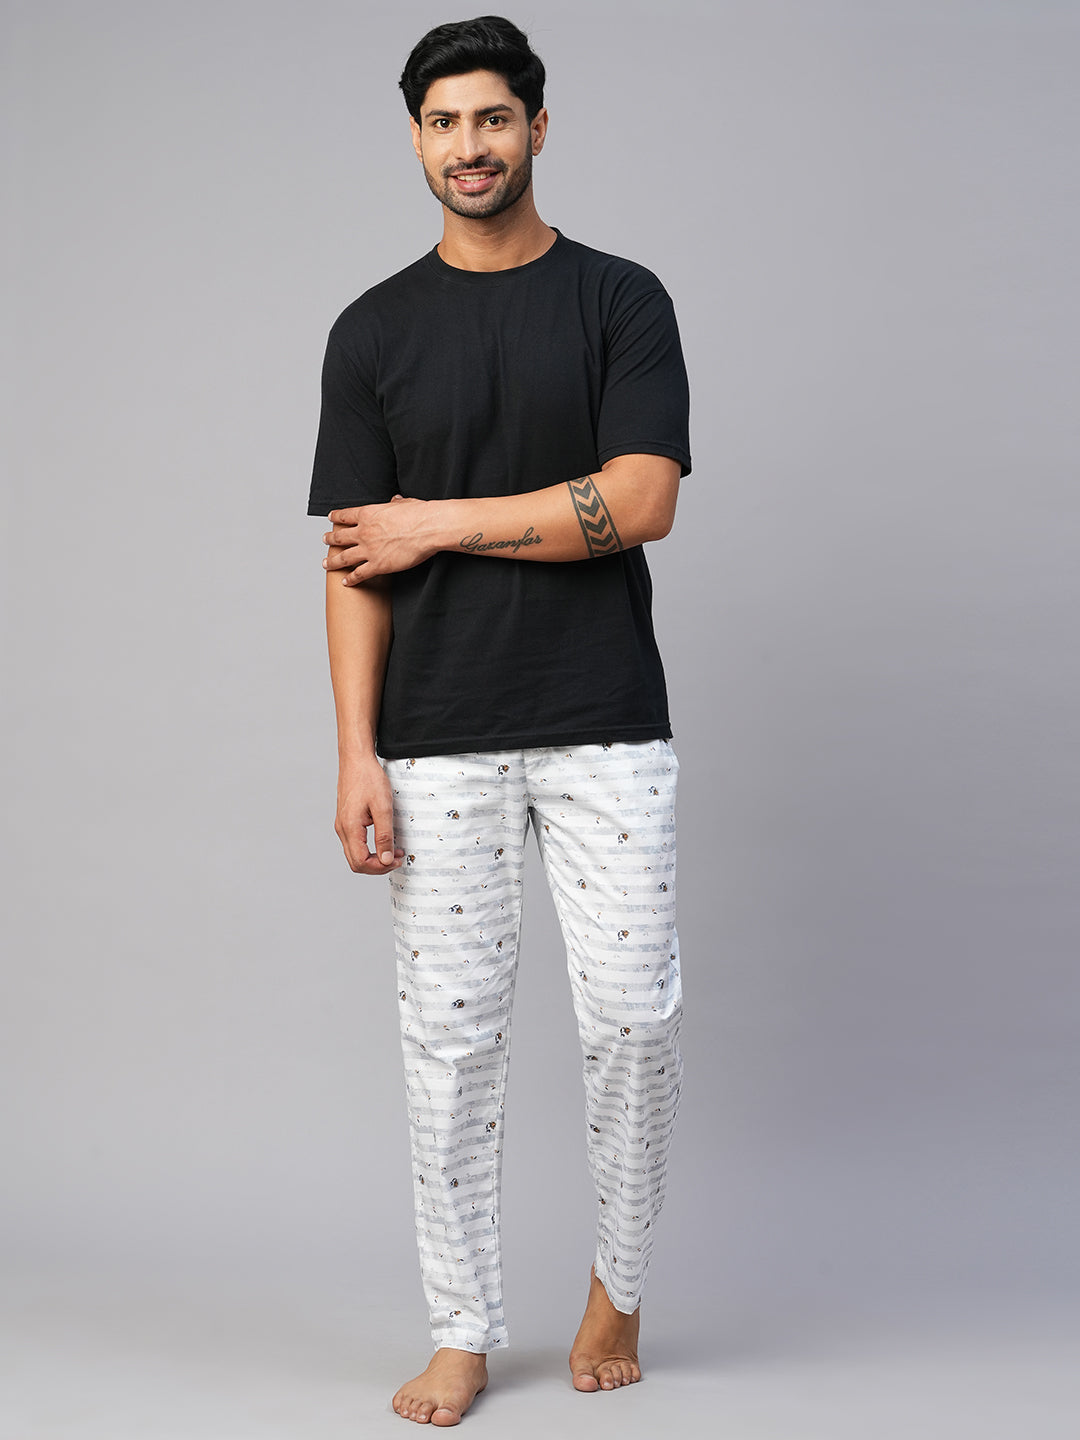 Men's Printed, White, Cotton, Regular Fit, Elasticated, Waistband, Pyjama  With Side Pockets